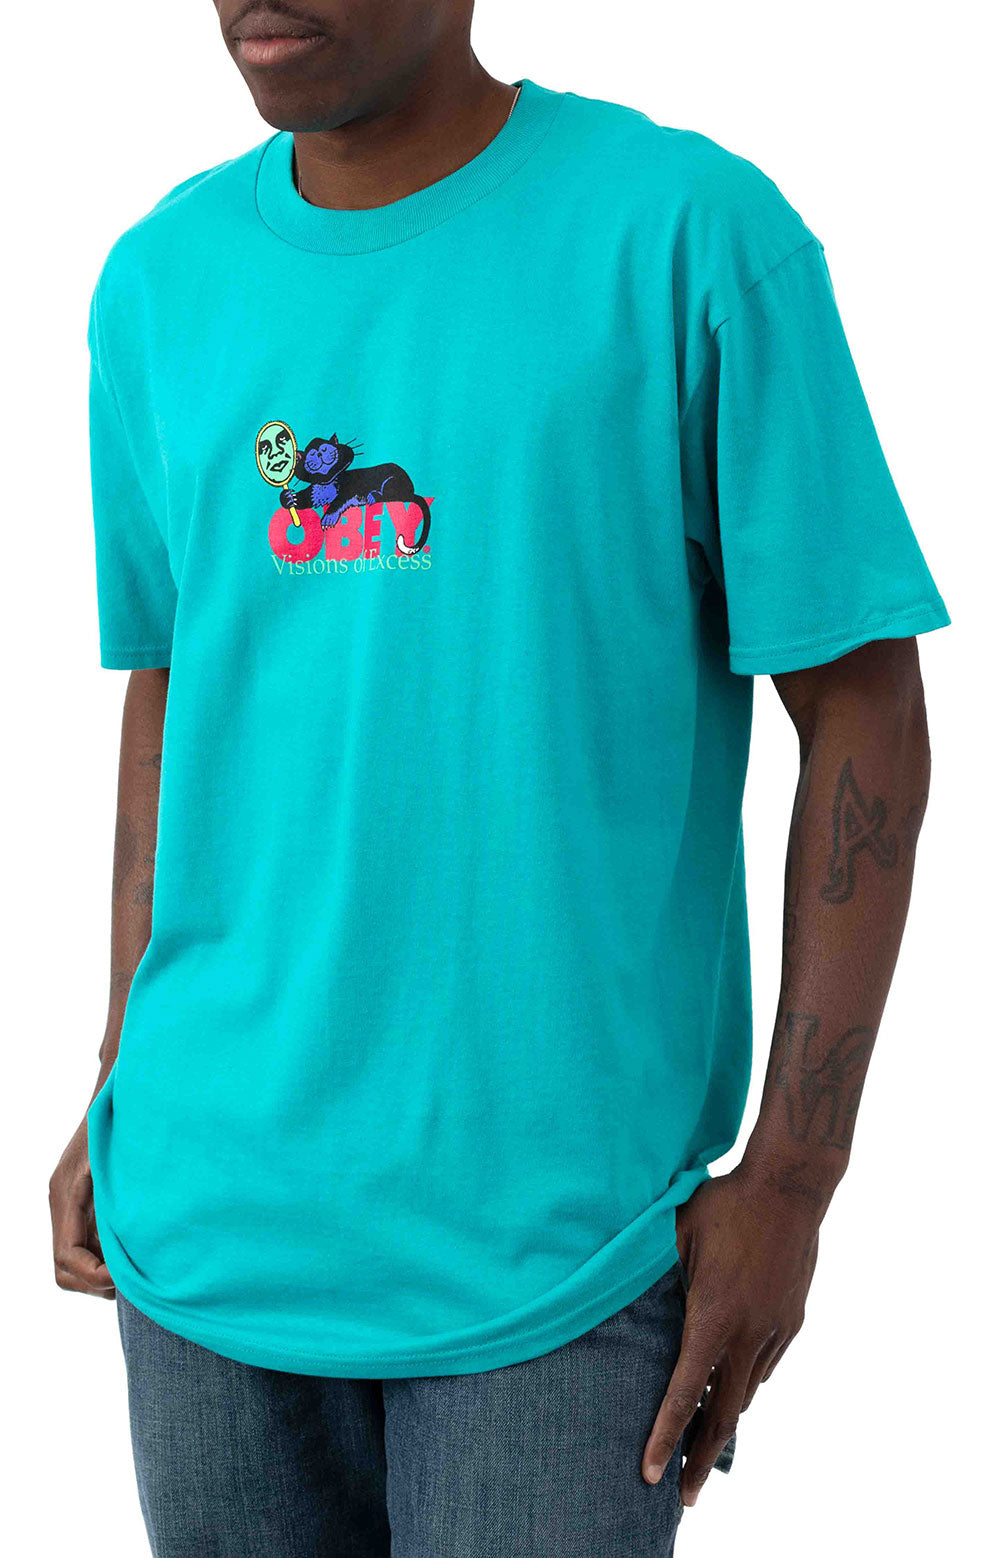 Visions Of Excess T-Shirt - Teal